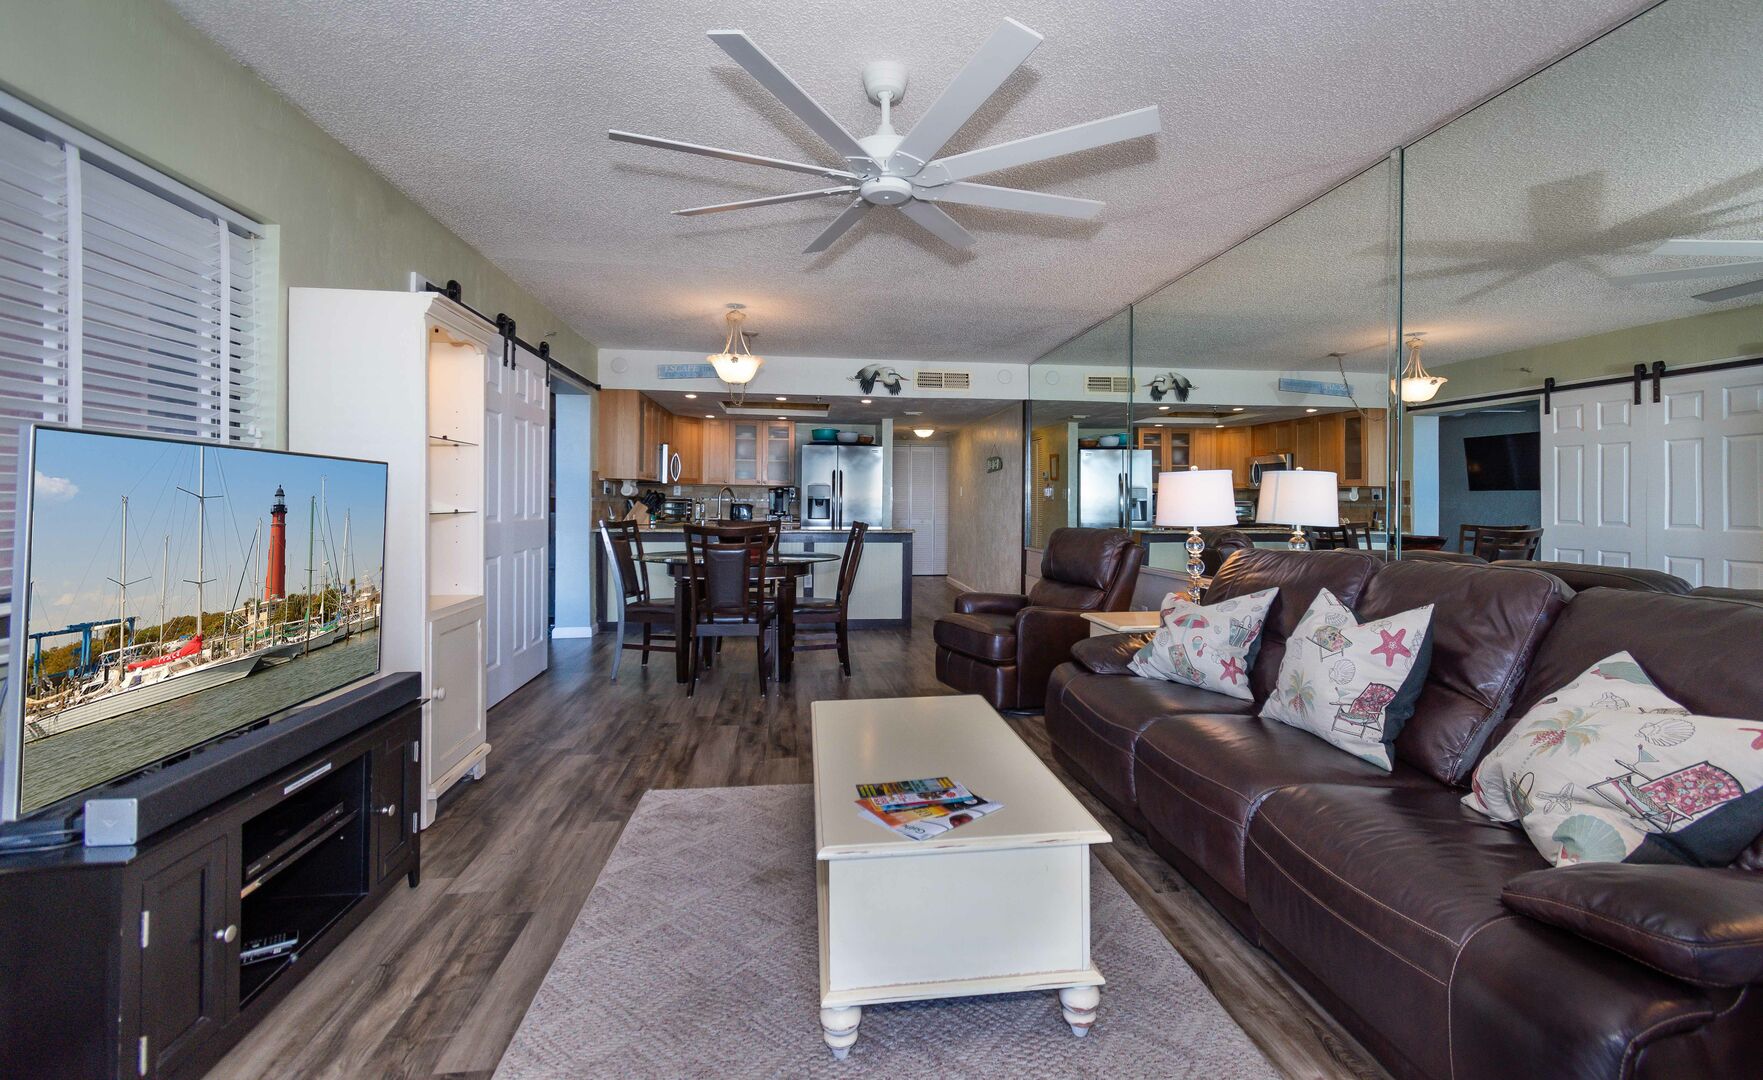 Living area of this vacation condo in New Smyrna Beach with flat screen TV, couch, and mirror wall.